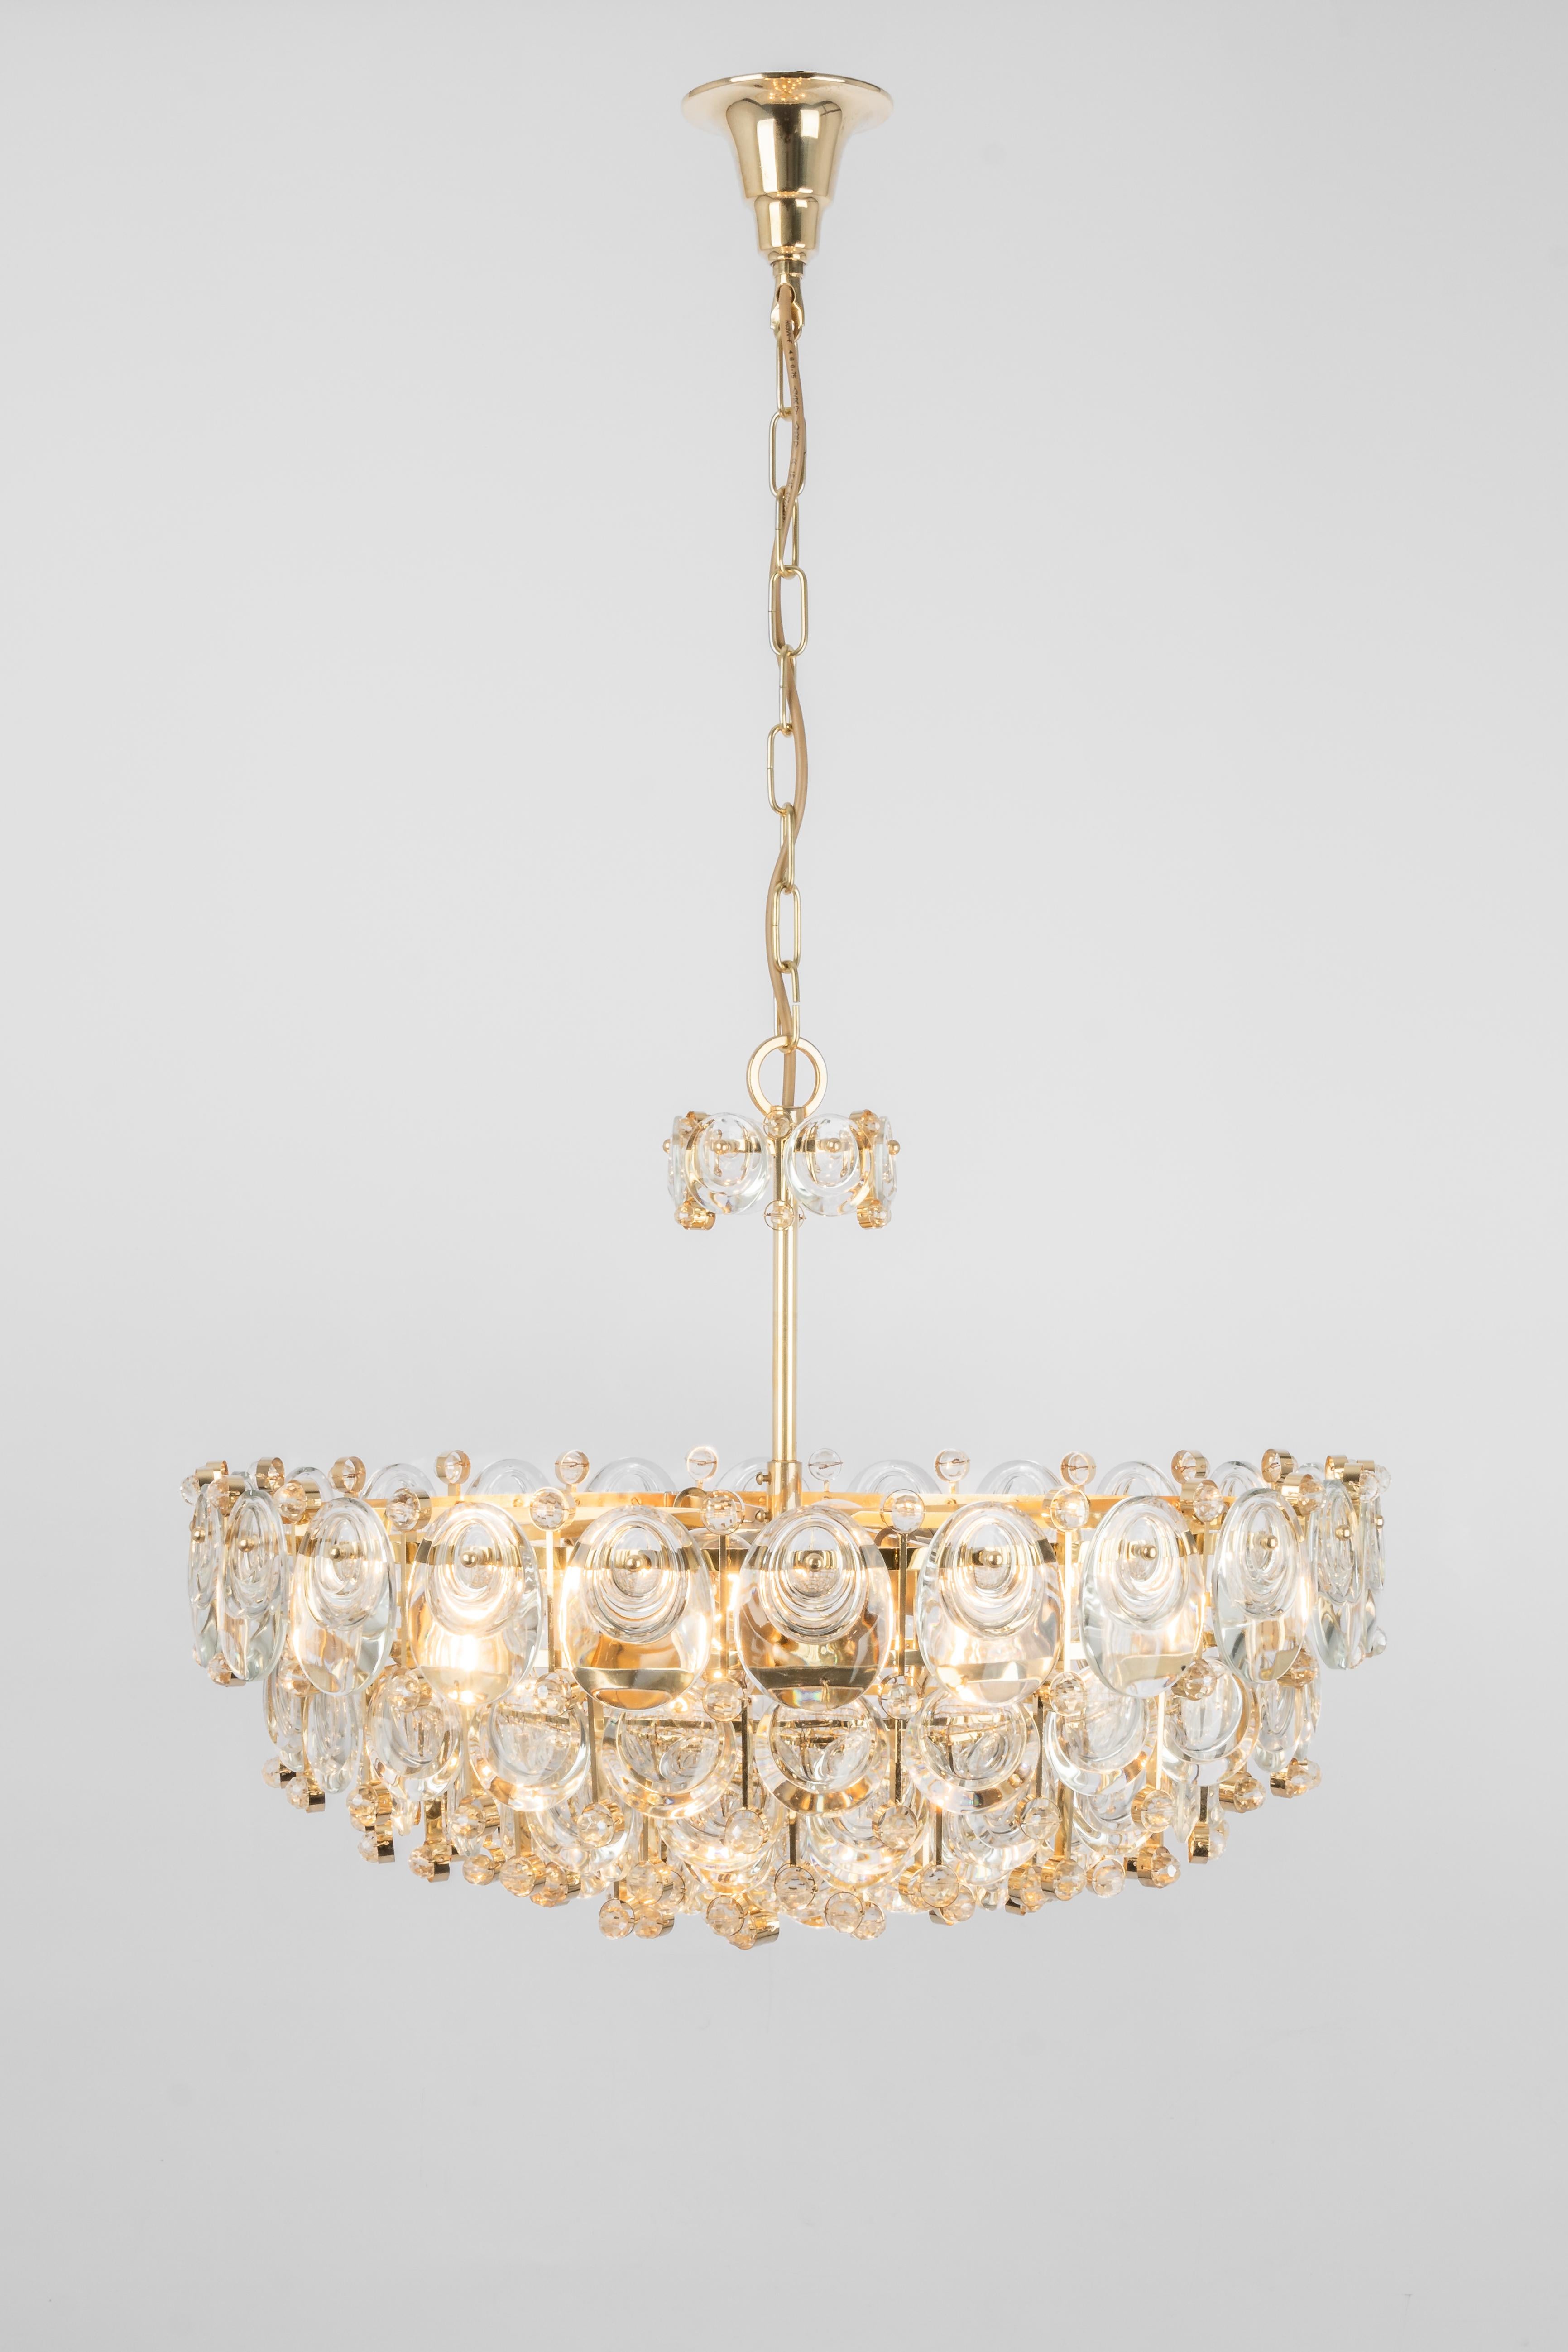 Delicate Gilt Brass Crystal Chandelier by Palwa, Sciolari Design, Germany, 1970s For Sale 8